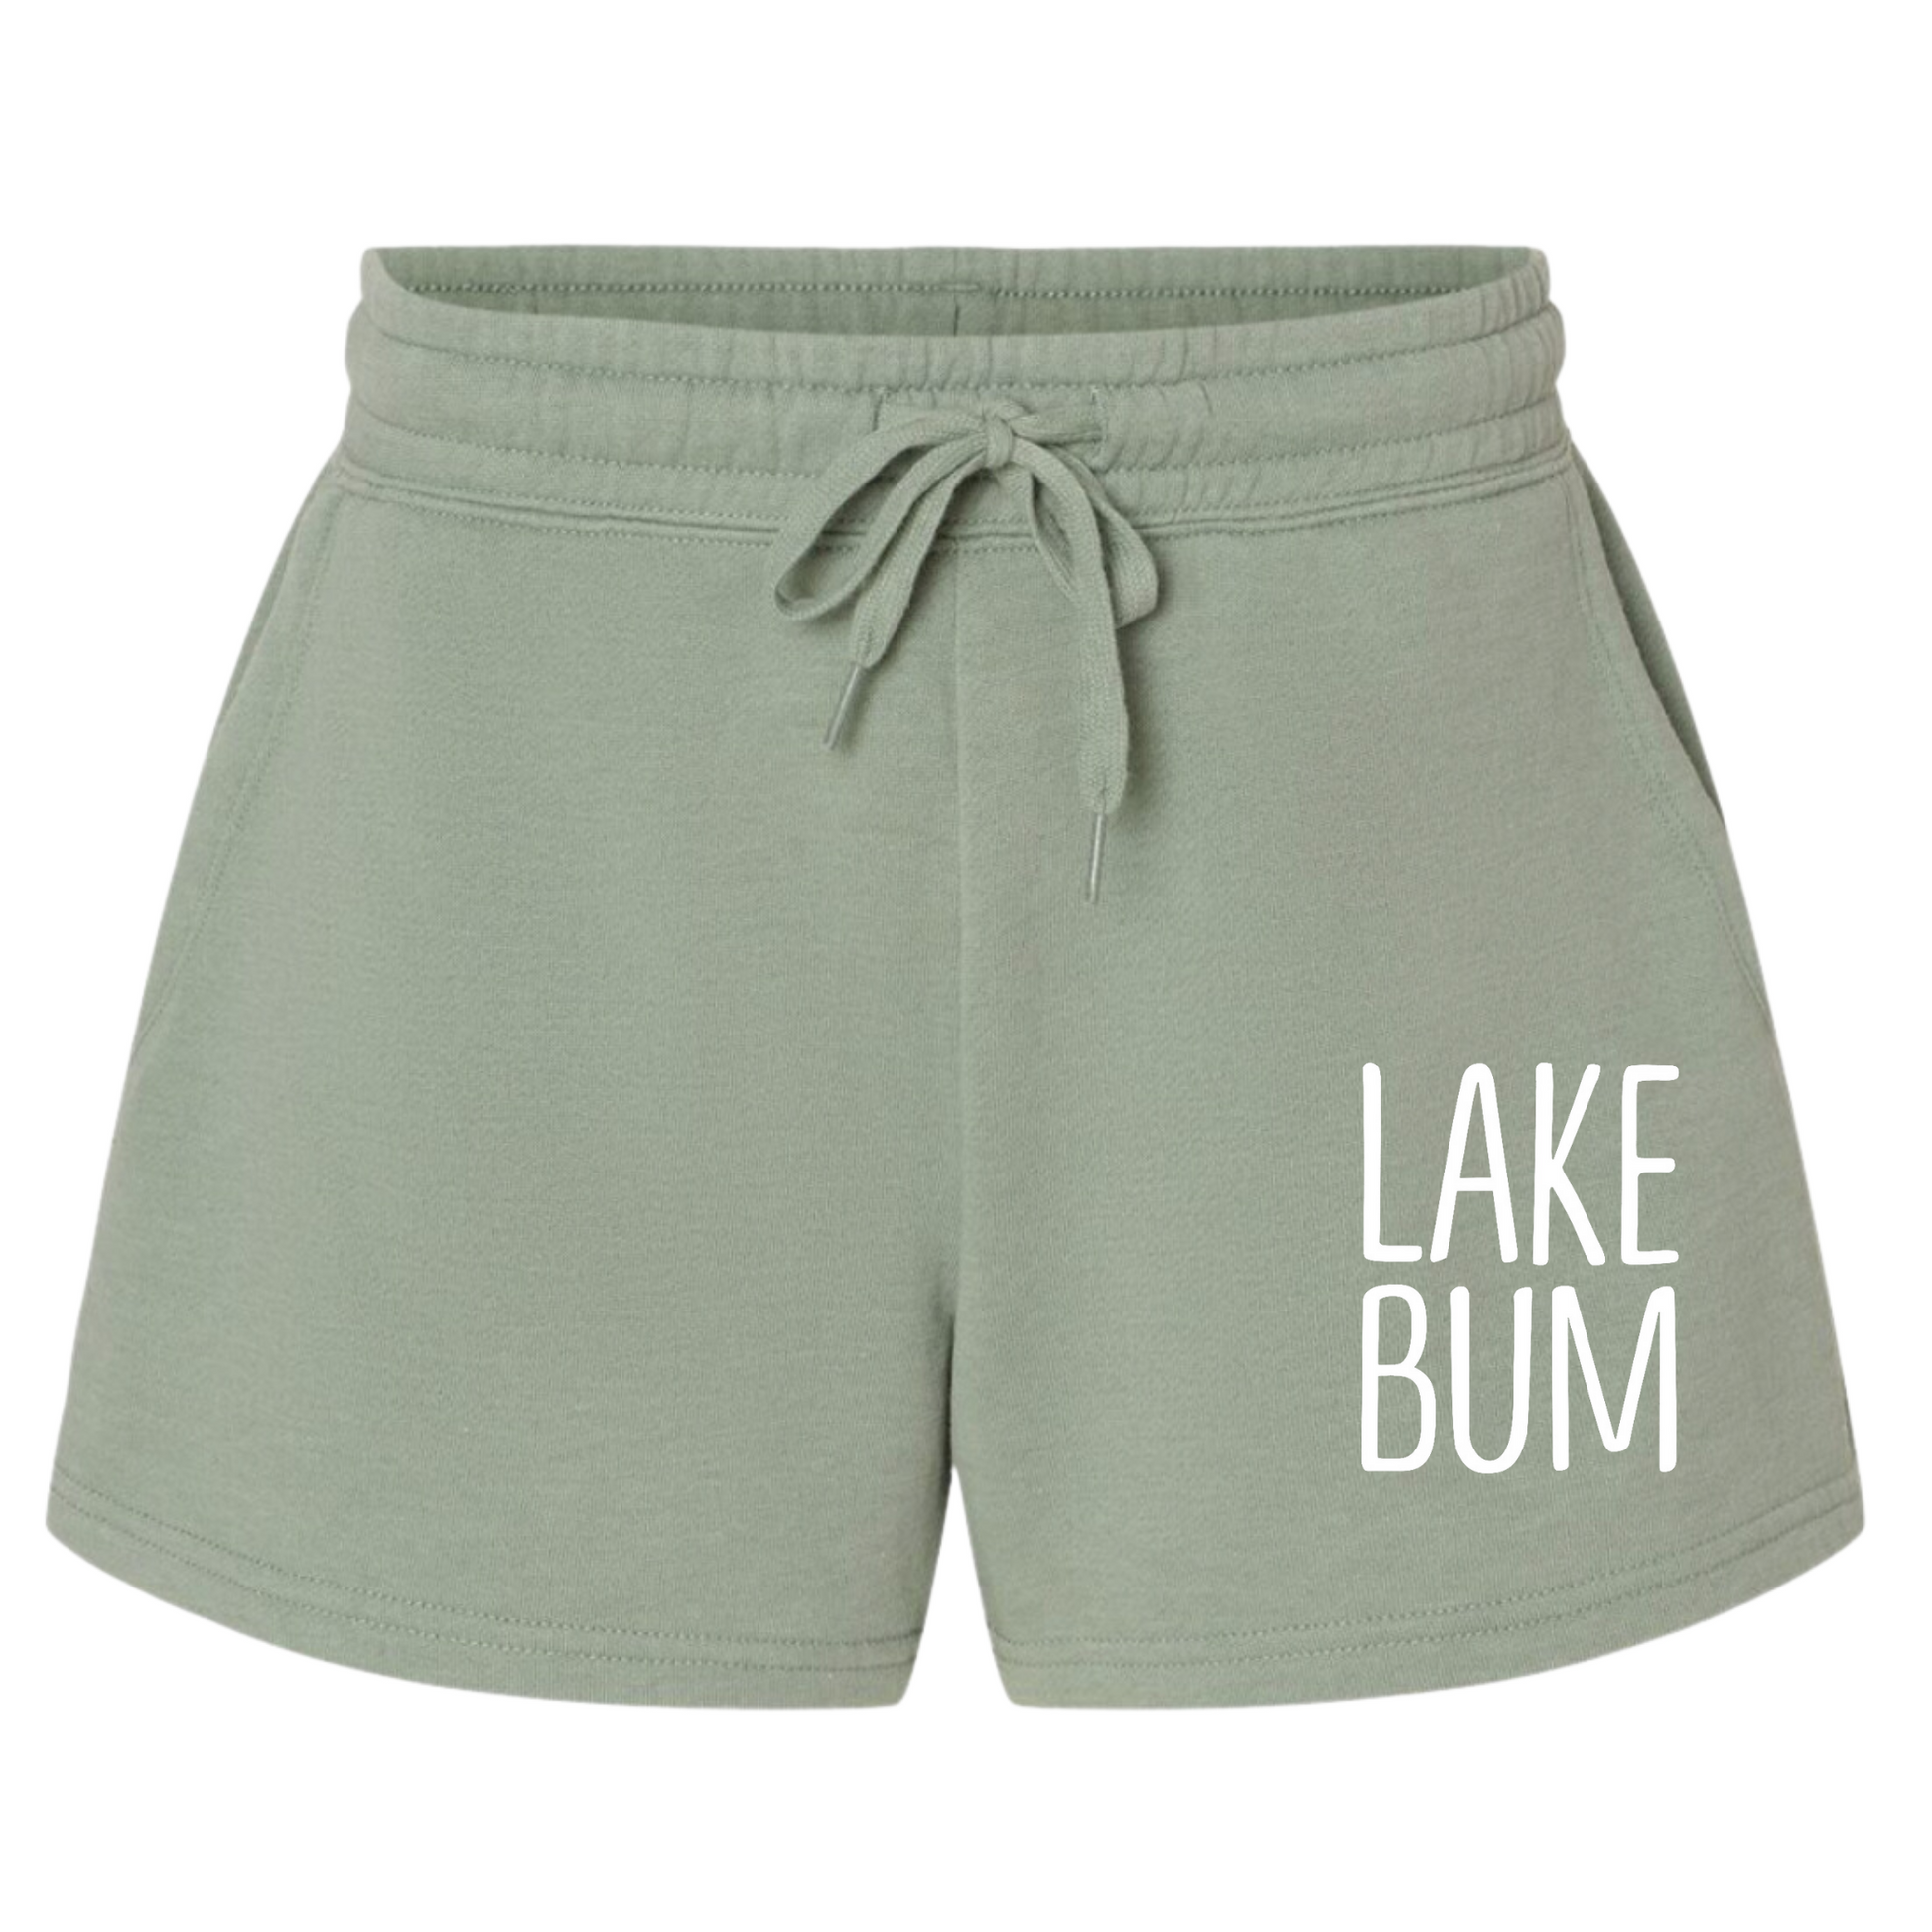 Lake Bum Shorts in a light mint green color with a "lake bum" saying on the right hand corner of the shorts. This is the front view of the shorts.